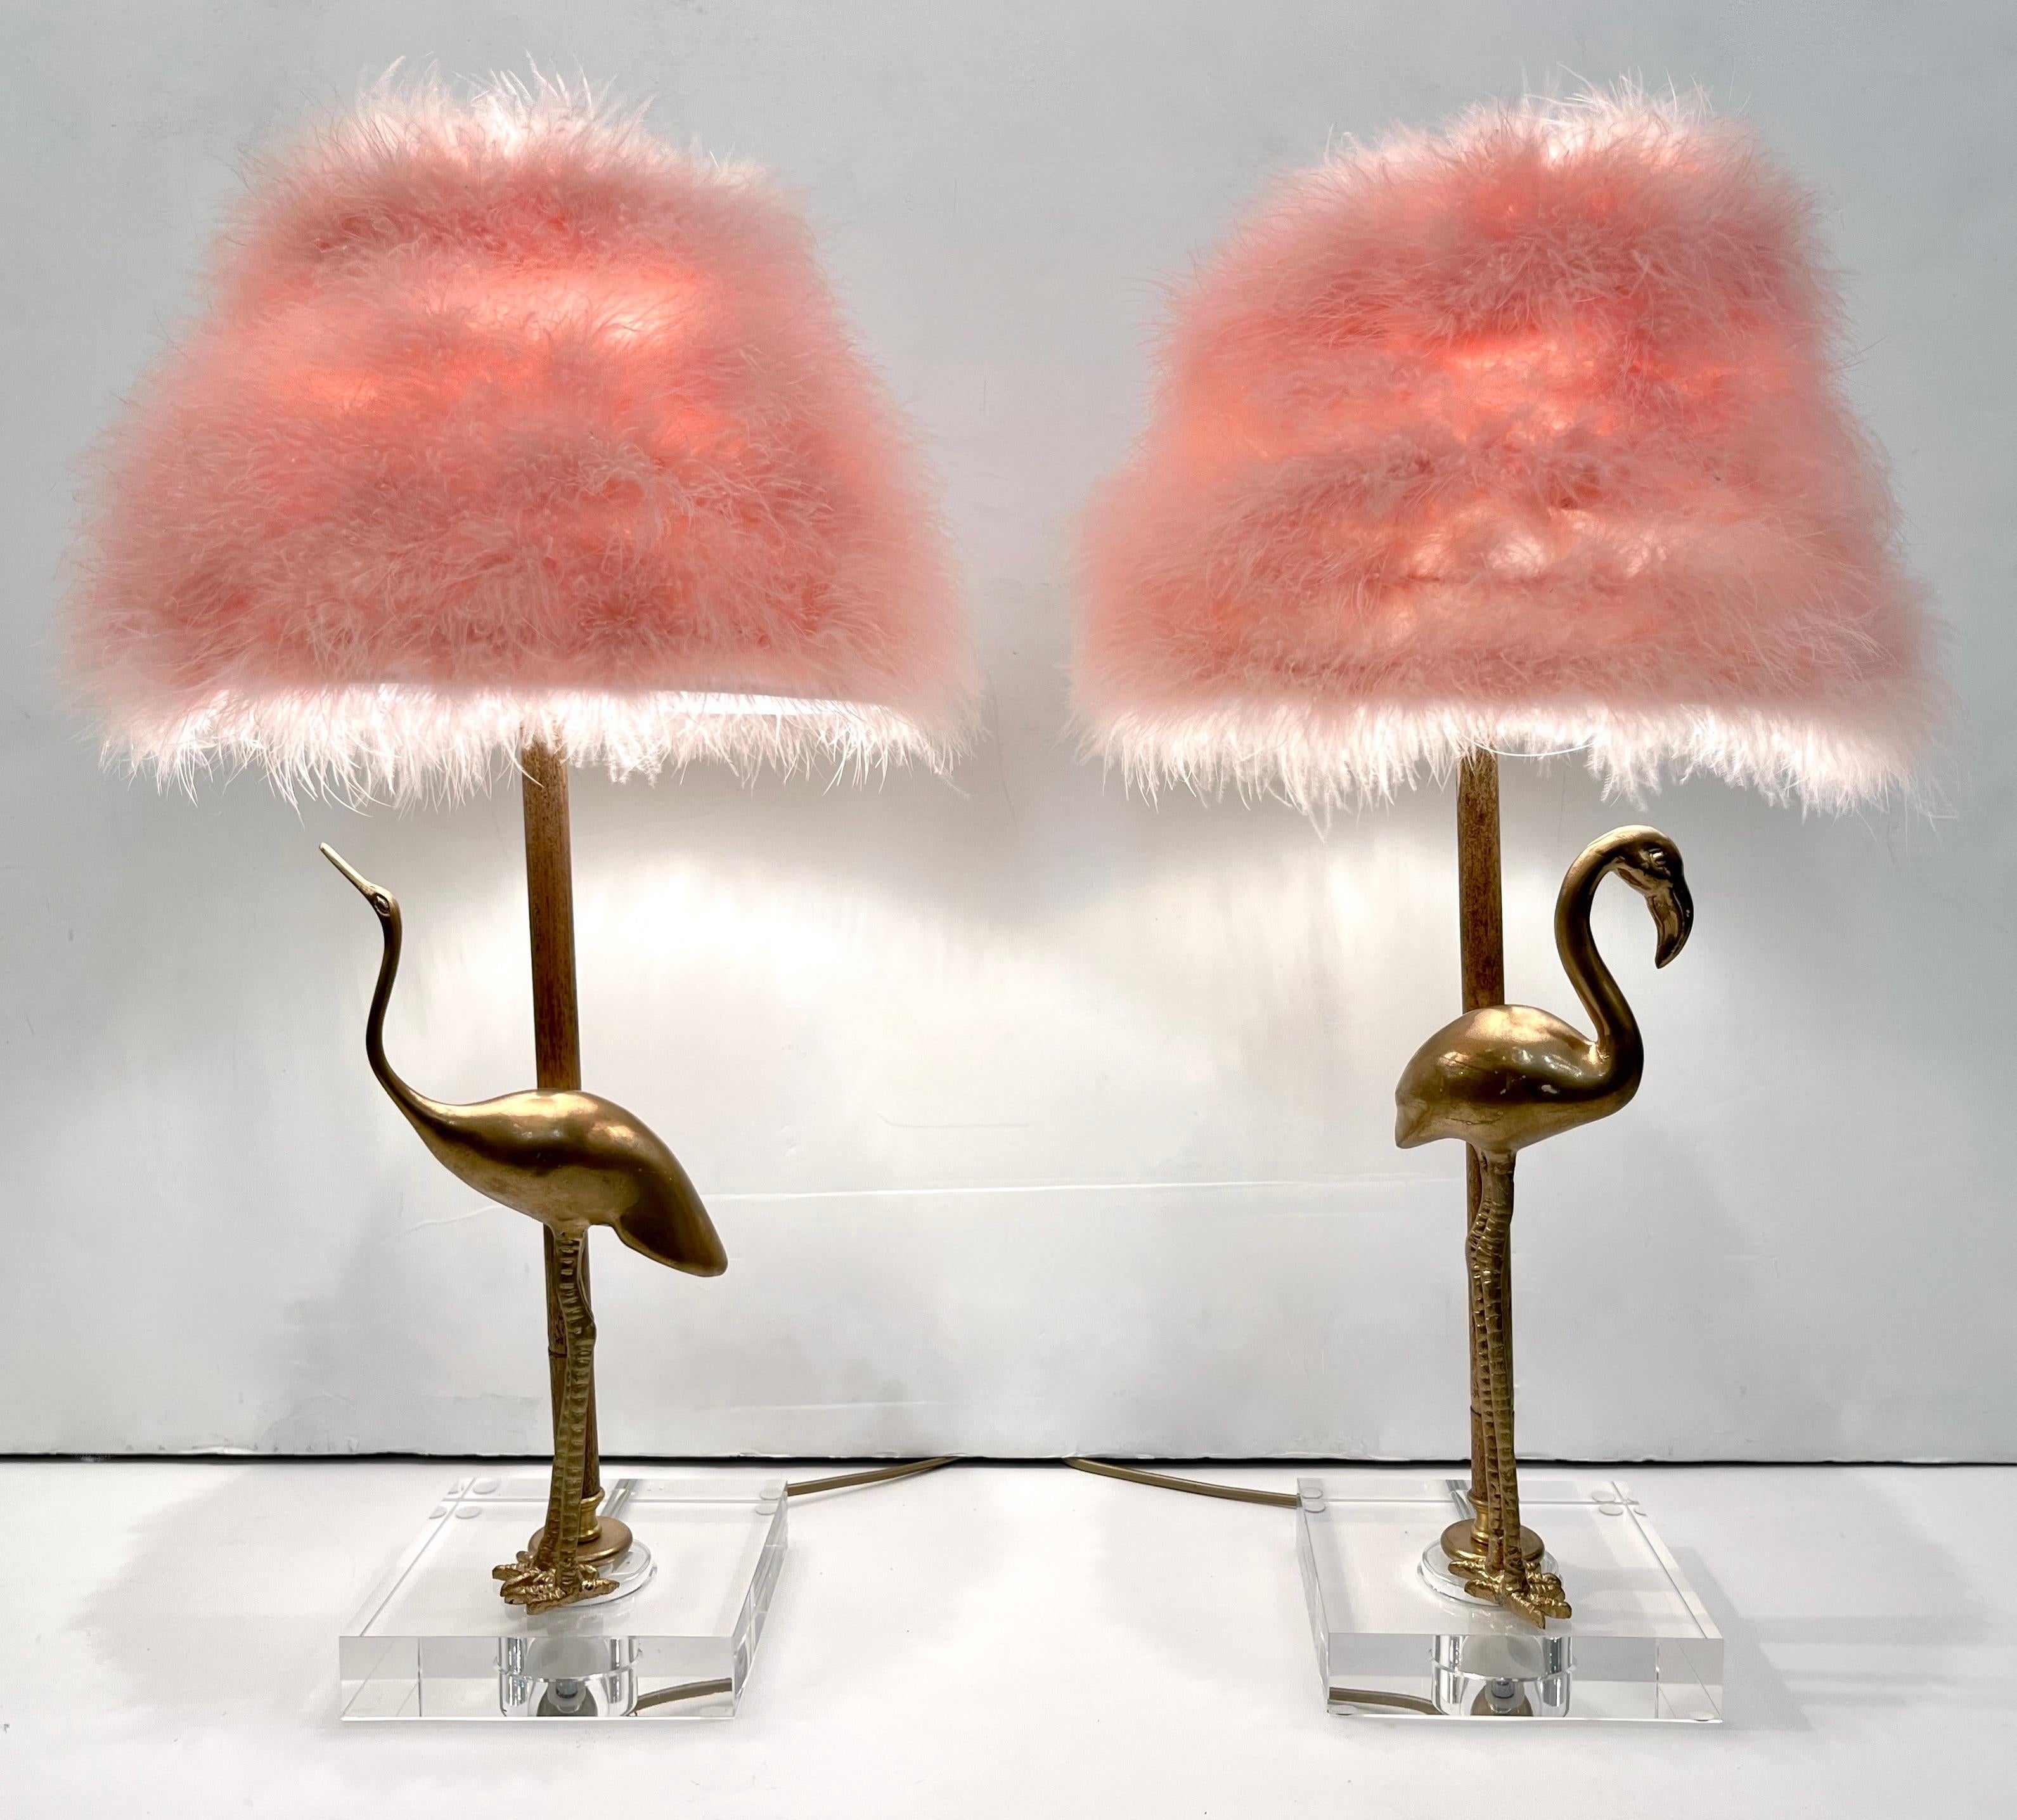 1970s Italian vintage one-of-a-kind brass lamps showing 2 different flamingo bird sculptures in brass, mounted on a lucite base and bamboo support, fitted with fun pink fur lampshades.
Dimensions of base: 5.5